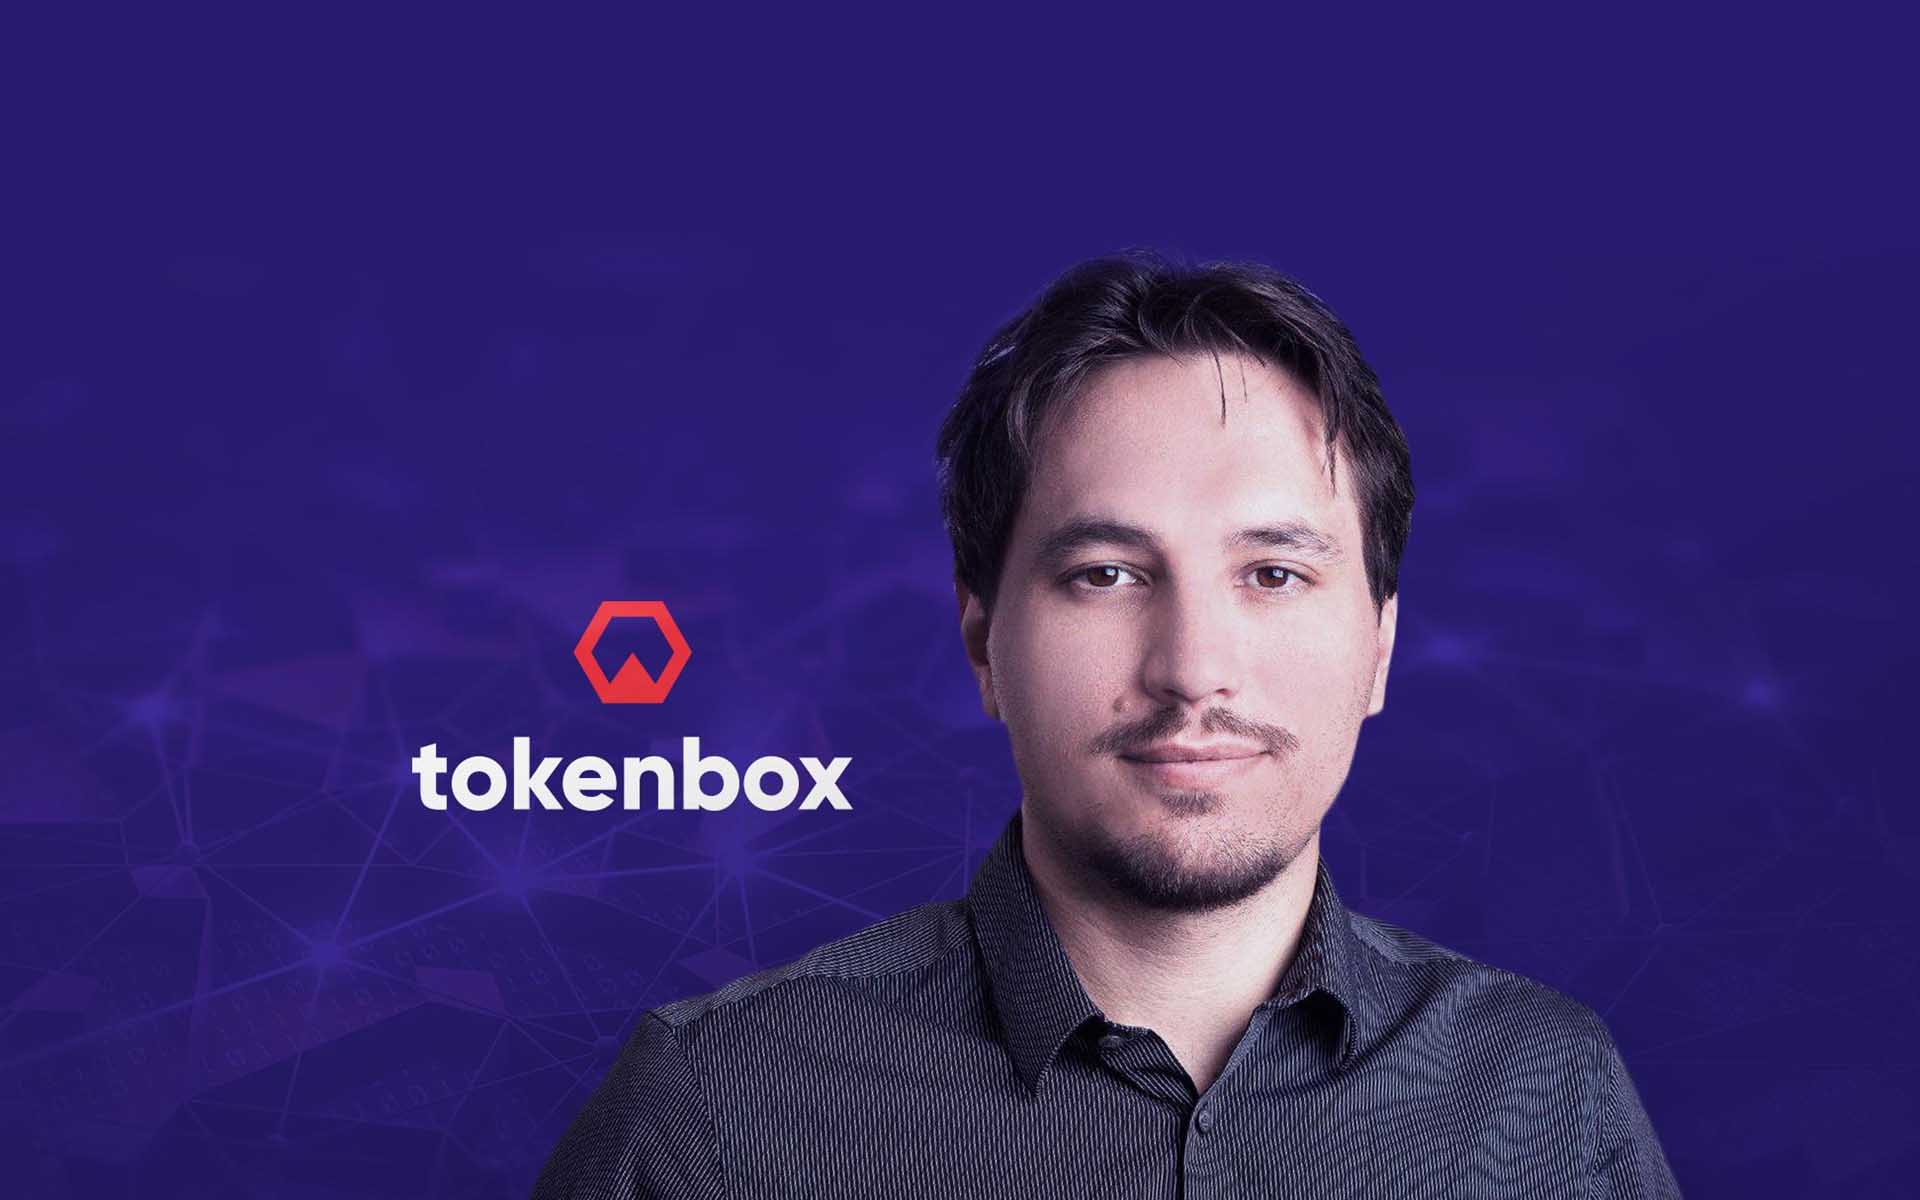 eToro Top Manager Becomes Tokenbox CEO